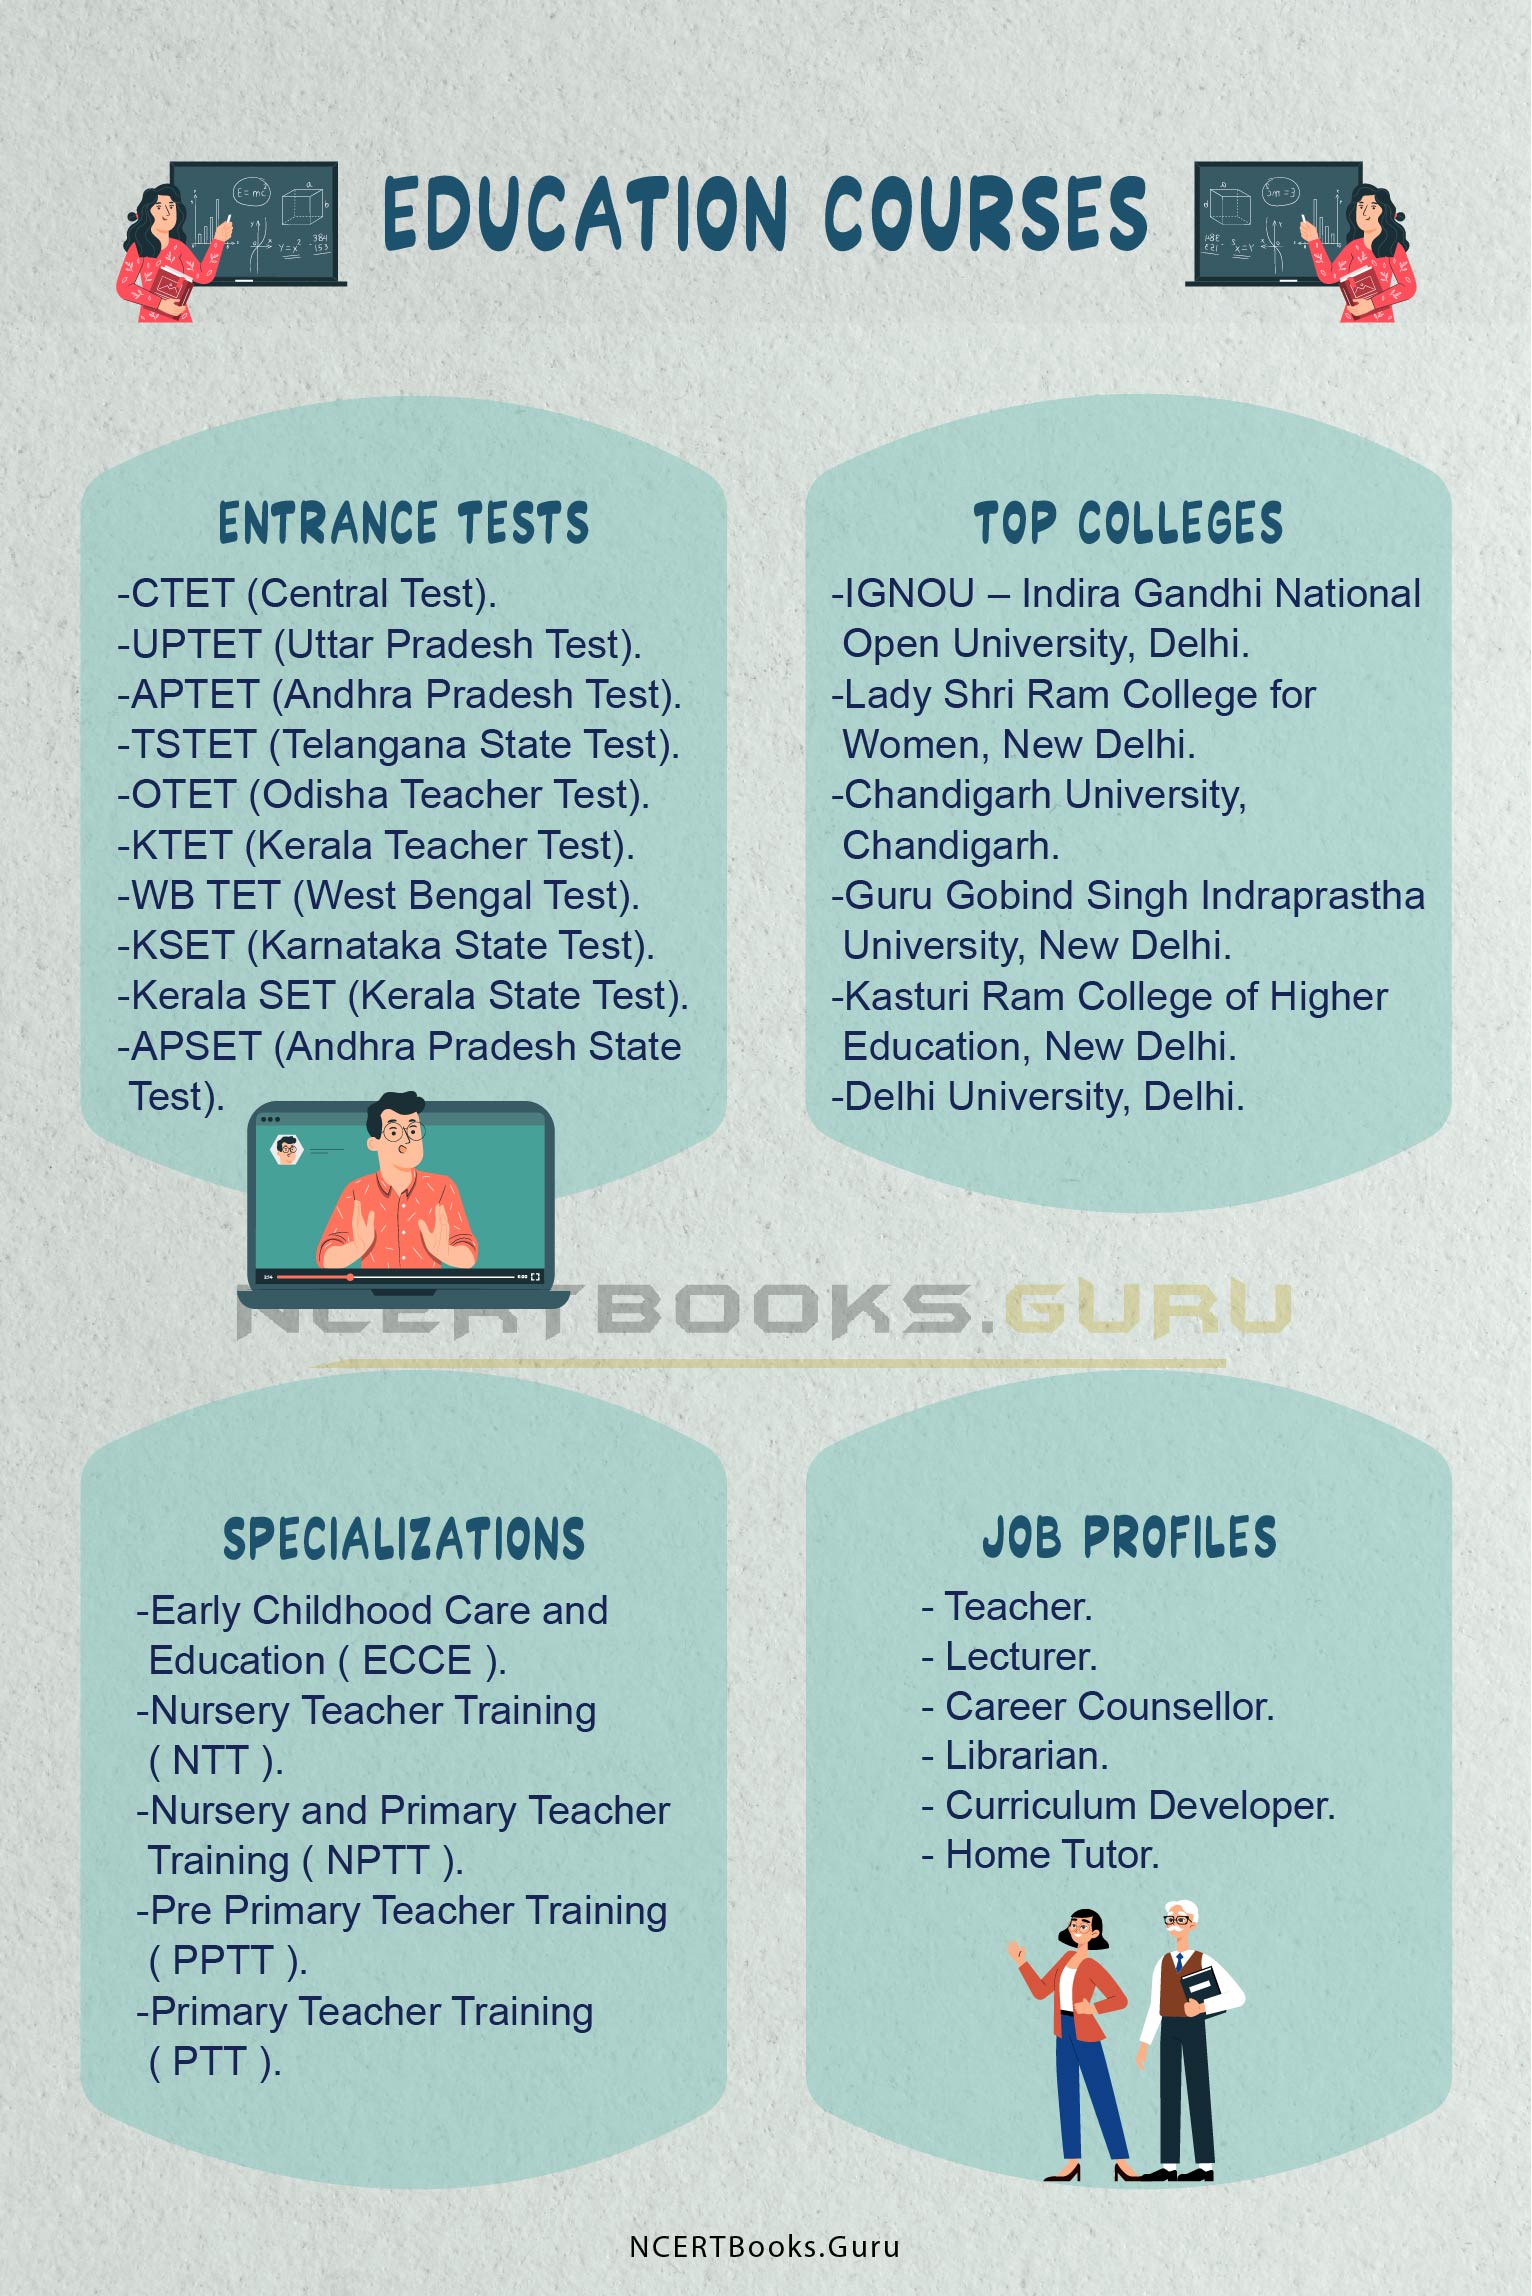 Education Courses in India